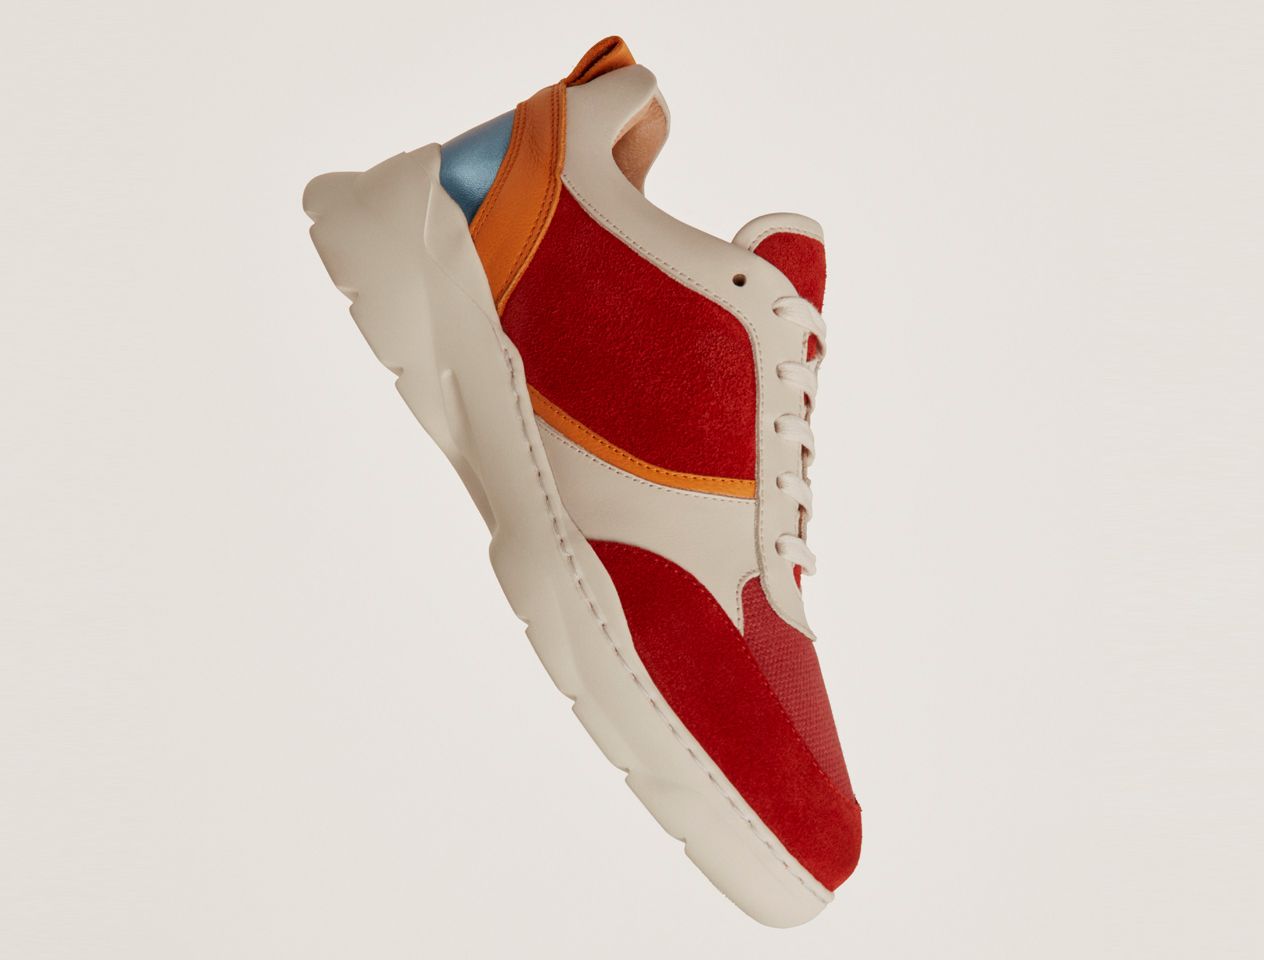 Ugly trainers trend - John Lewis & Partners Ellie Leather Trainers